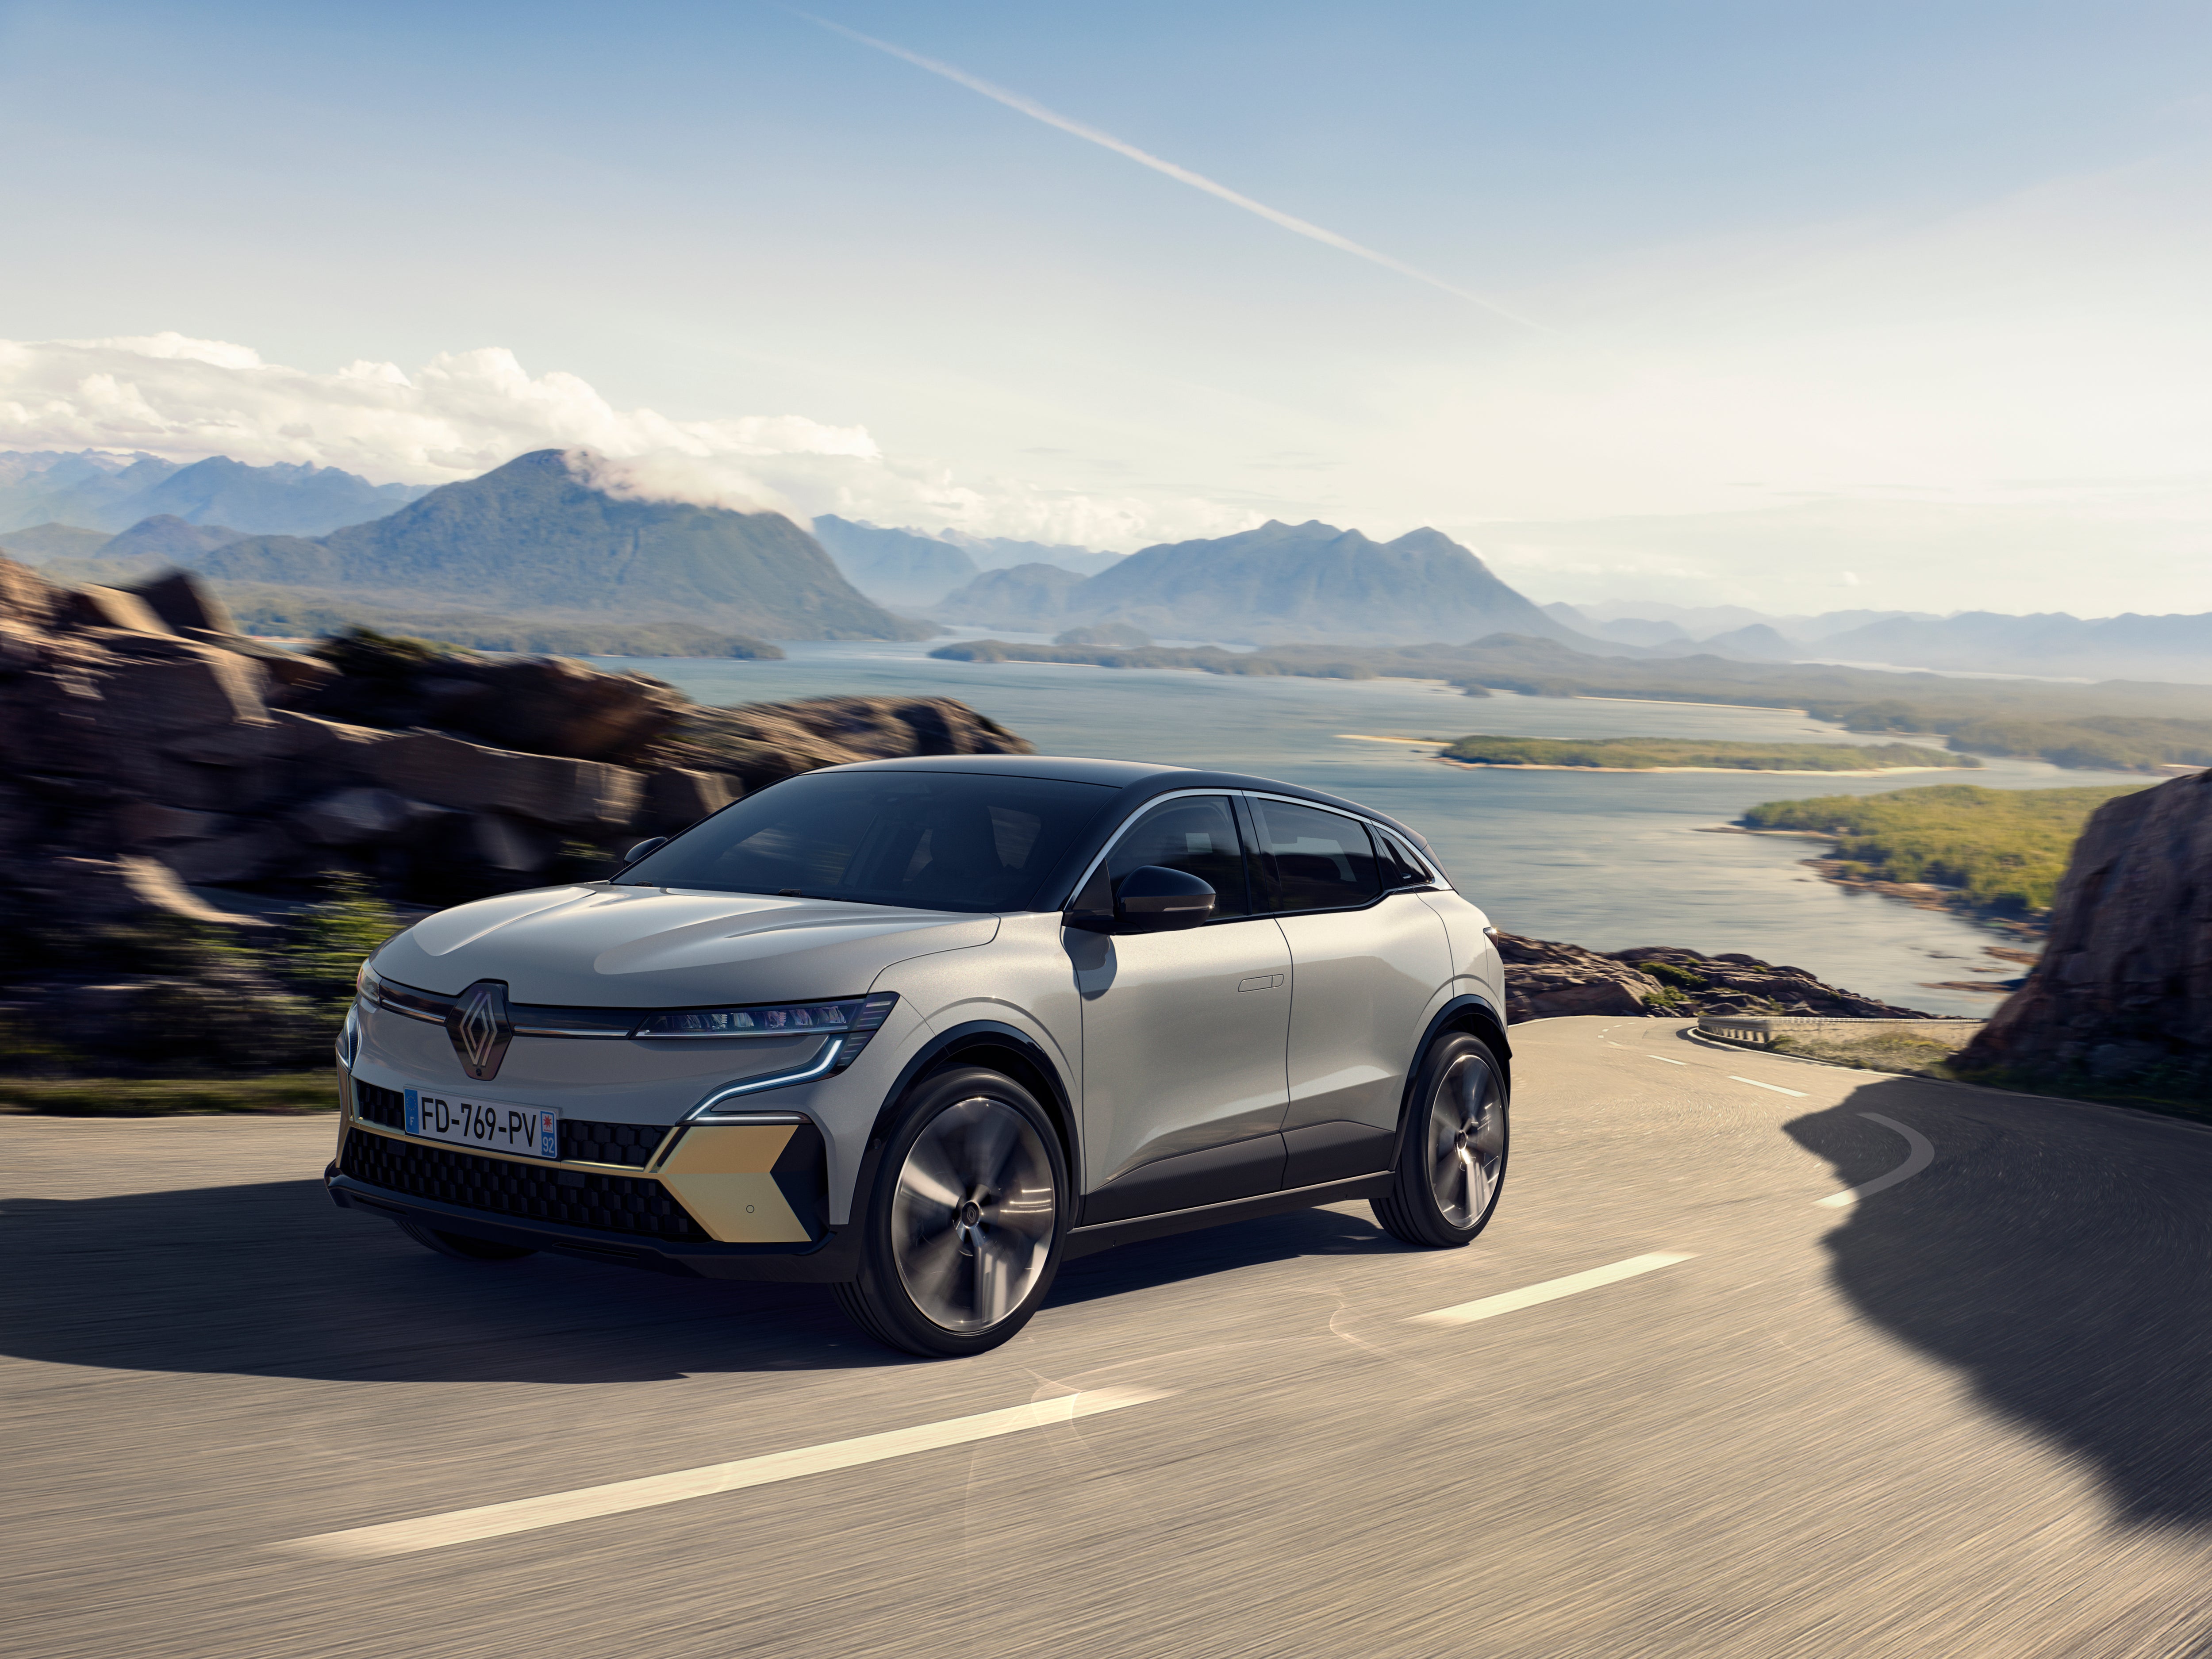 <p>The Megane has been a minor part of our national life for some decades</p>